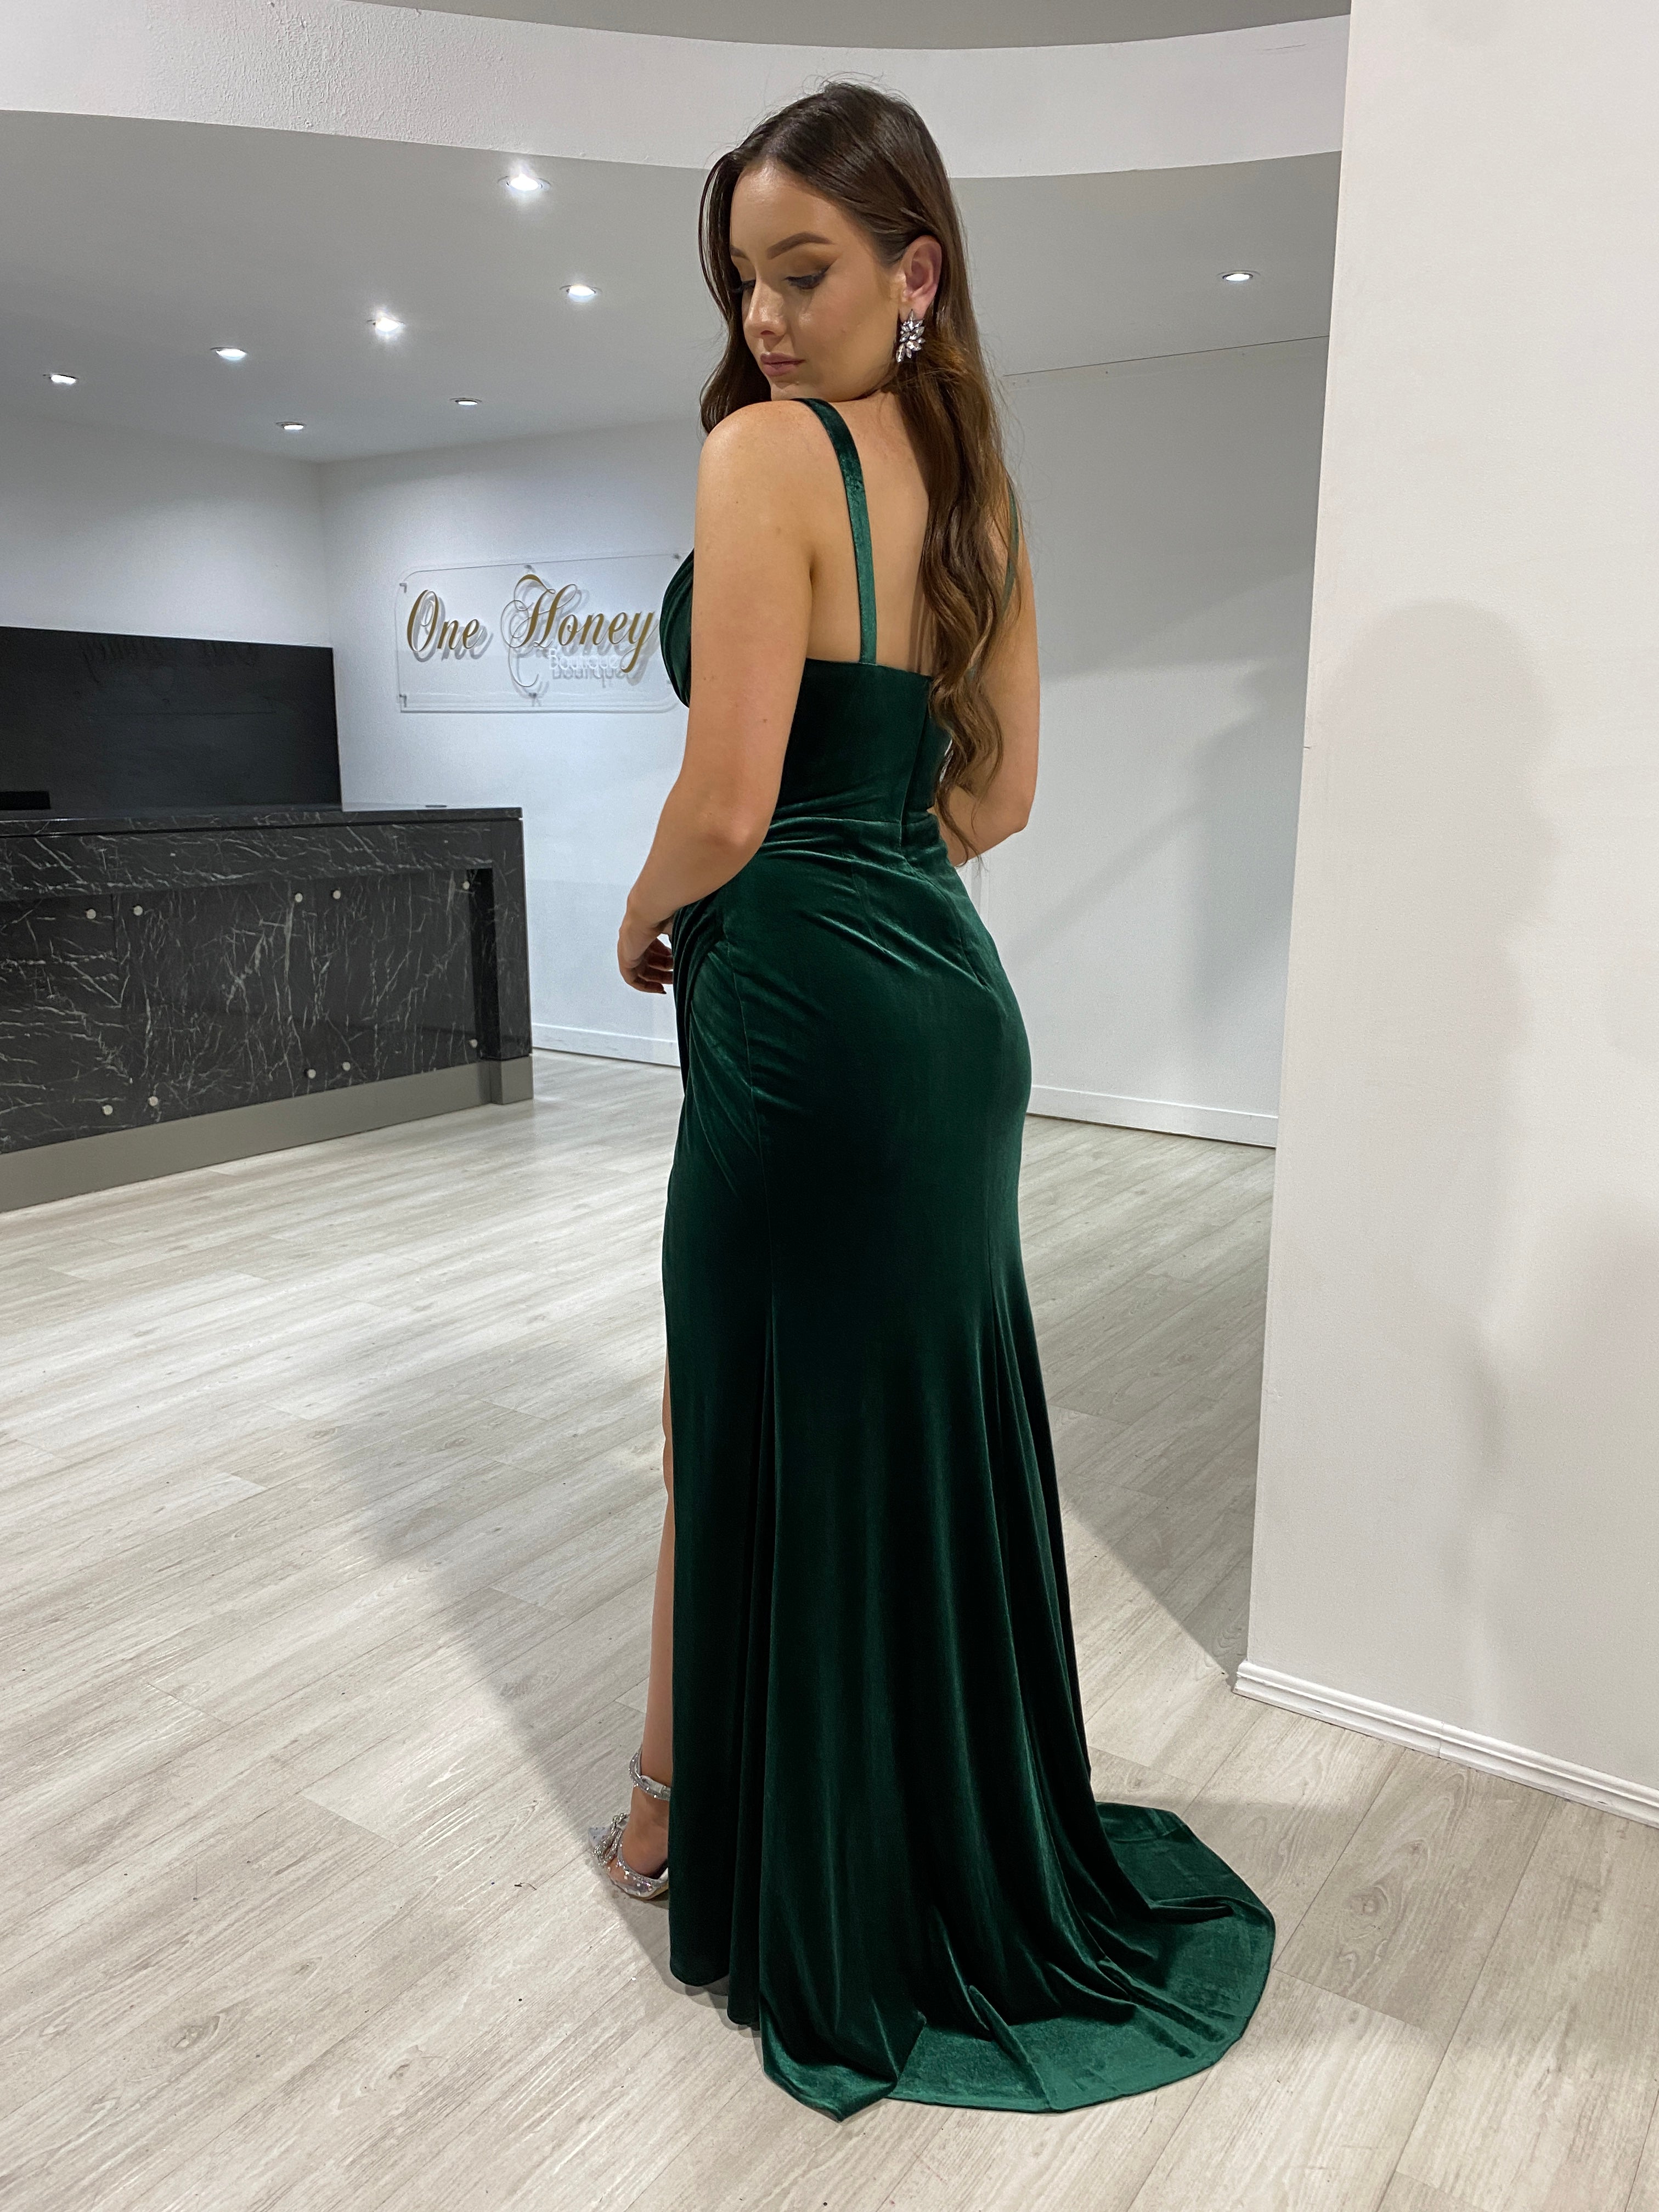 Honey Couture HARLEY Emerald Bustier Velour Corset Mermaid Formal Dress